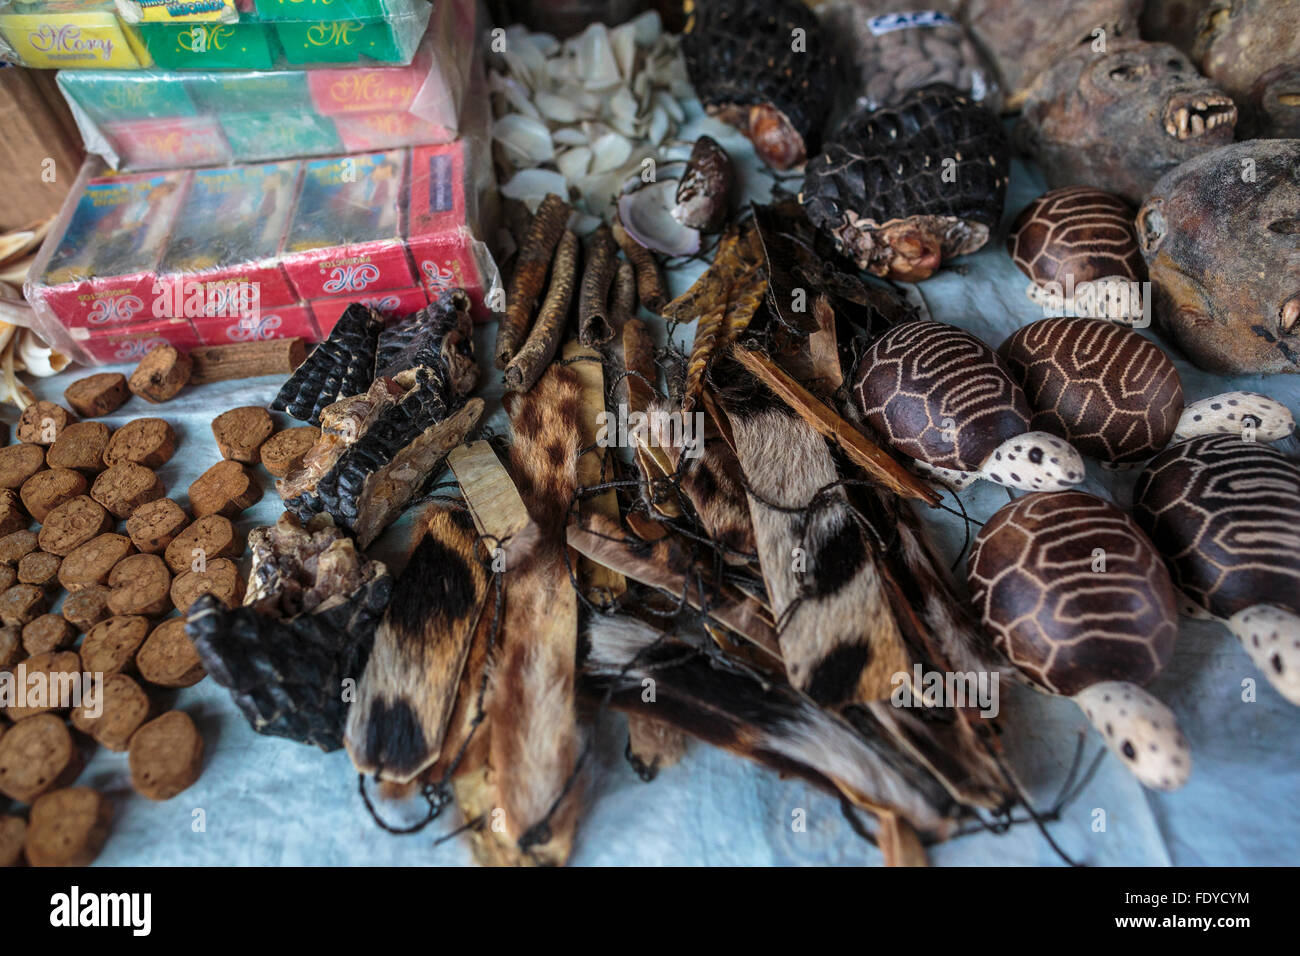 Monkey skulls, Crocodile Scales, animal fur, Ayahuasca and plant extracts are for sale in Sorcerer's Alley in Belen Market Peru Stock Photo